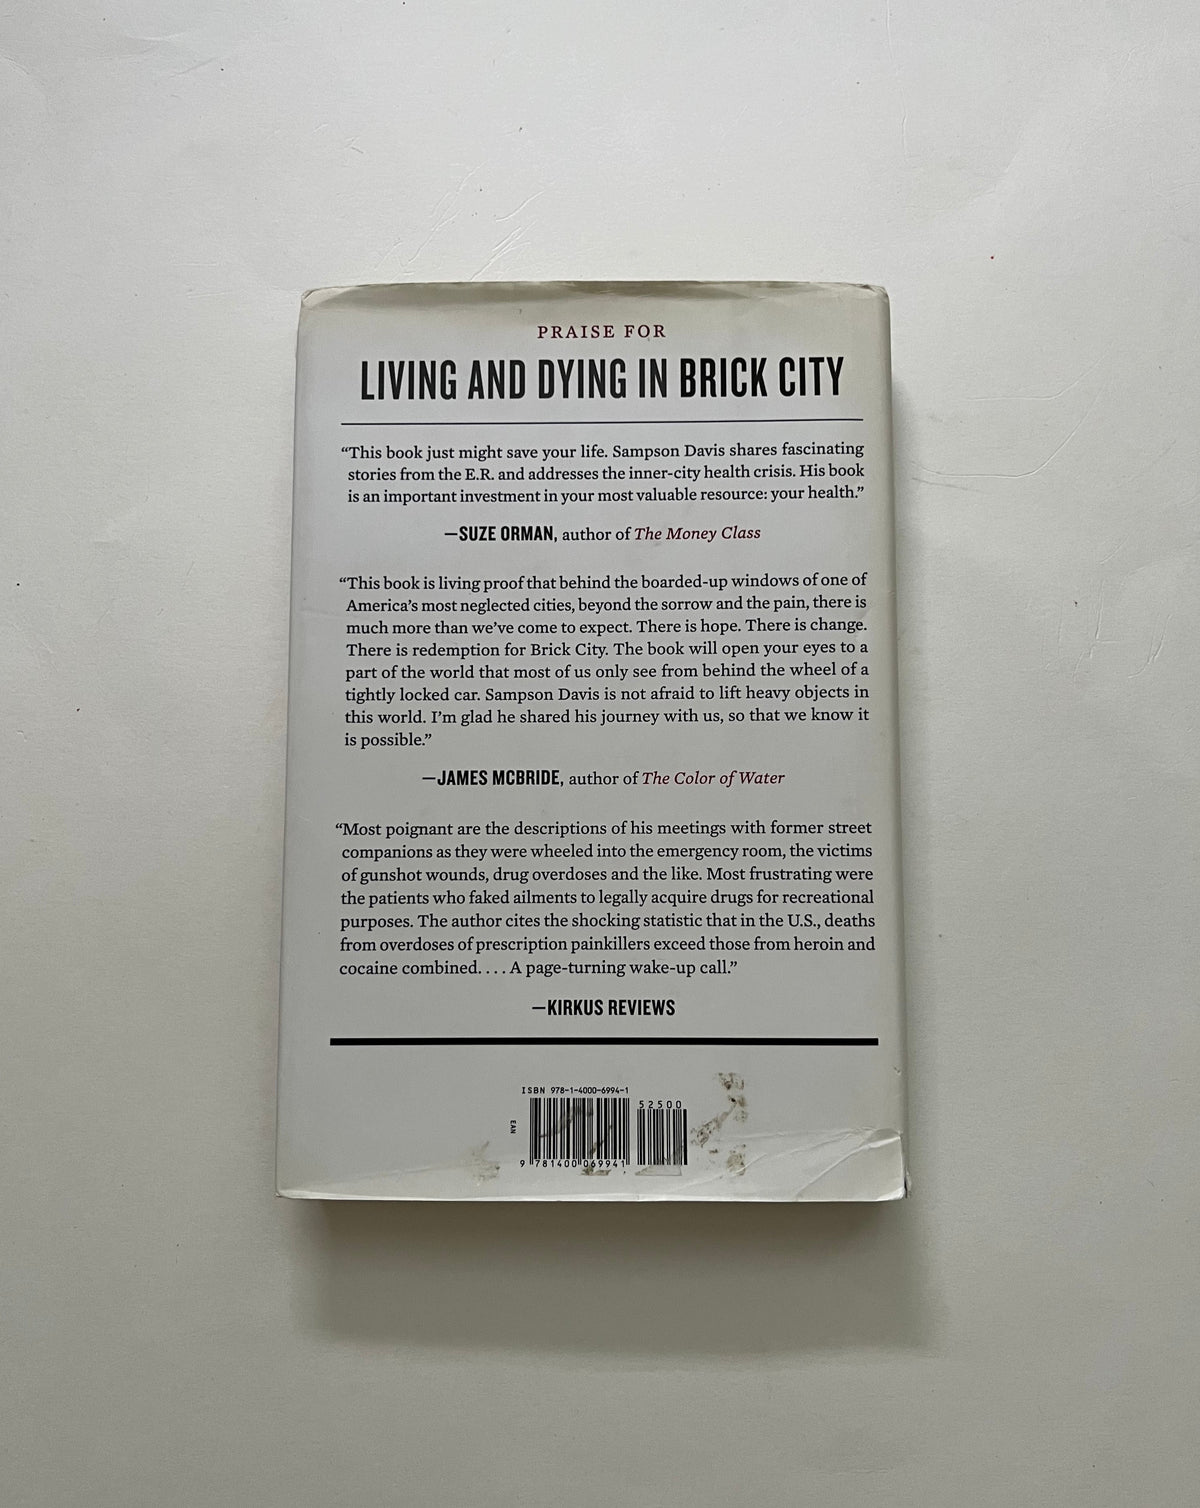 Living and Dying in Brick City: Stories from the Front Lines of an Inner-City E.R. by Sampson Davis